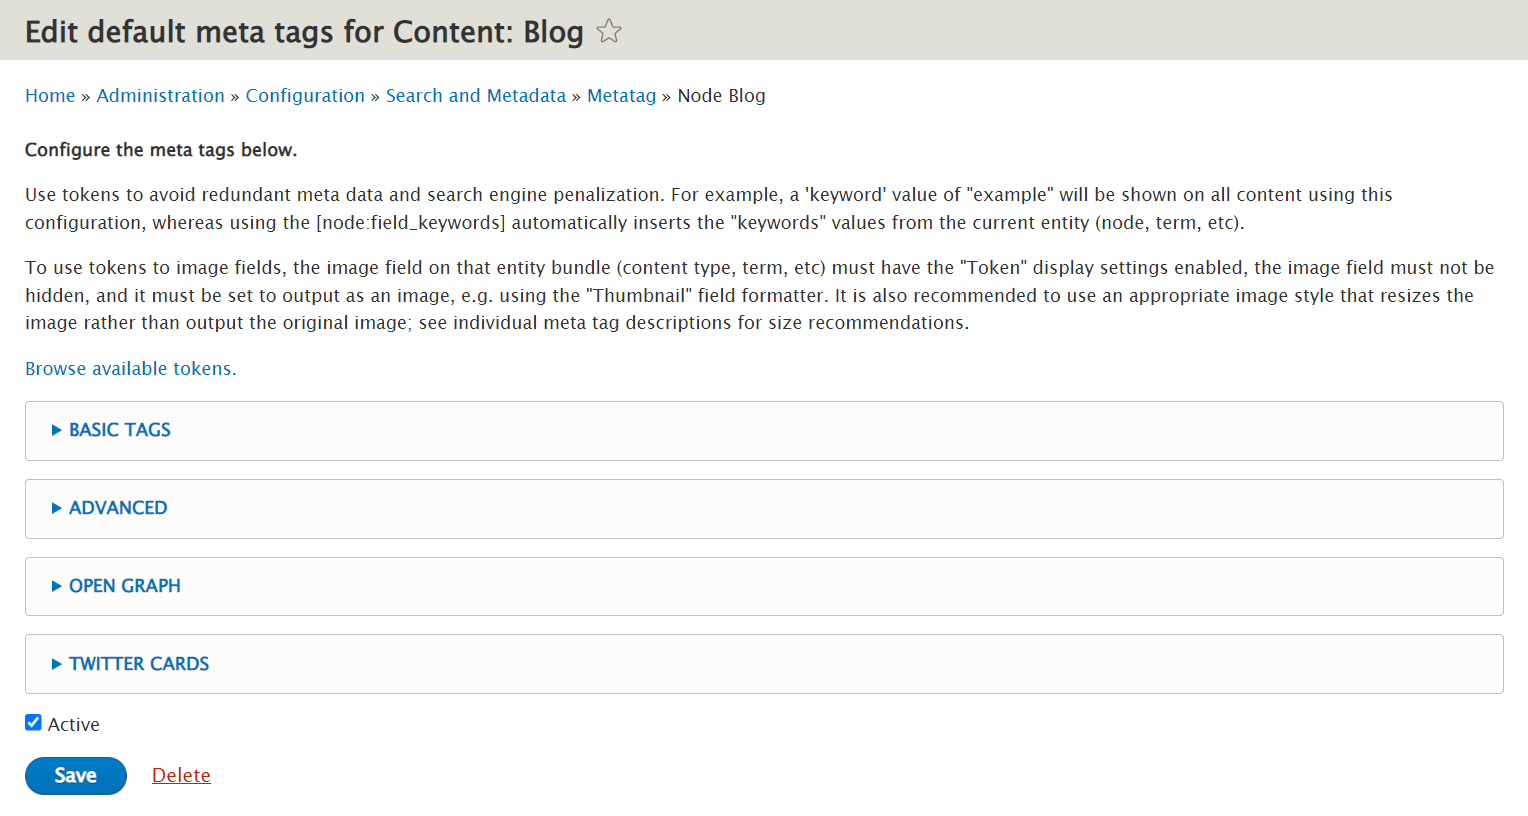 Viewing the list of all meta tags for the Blog